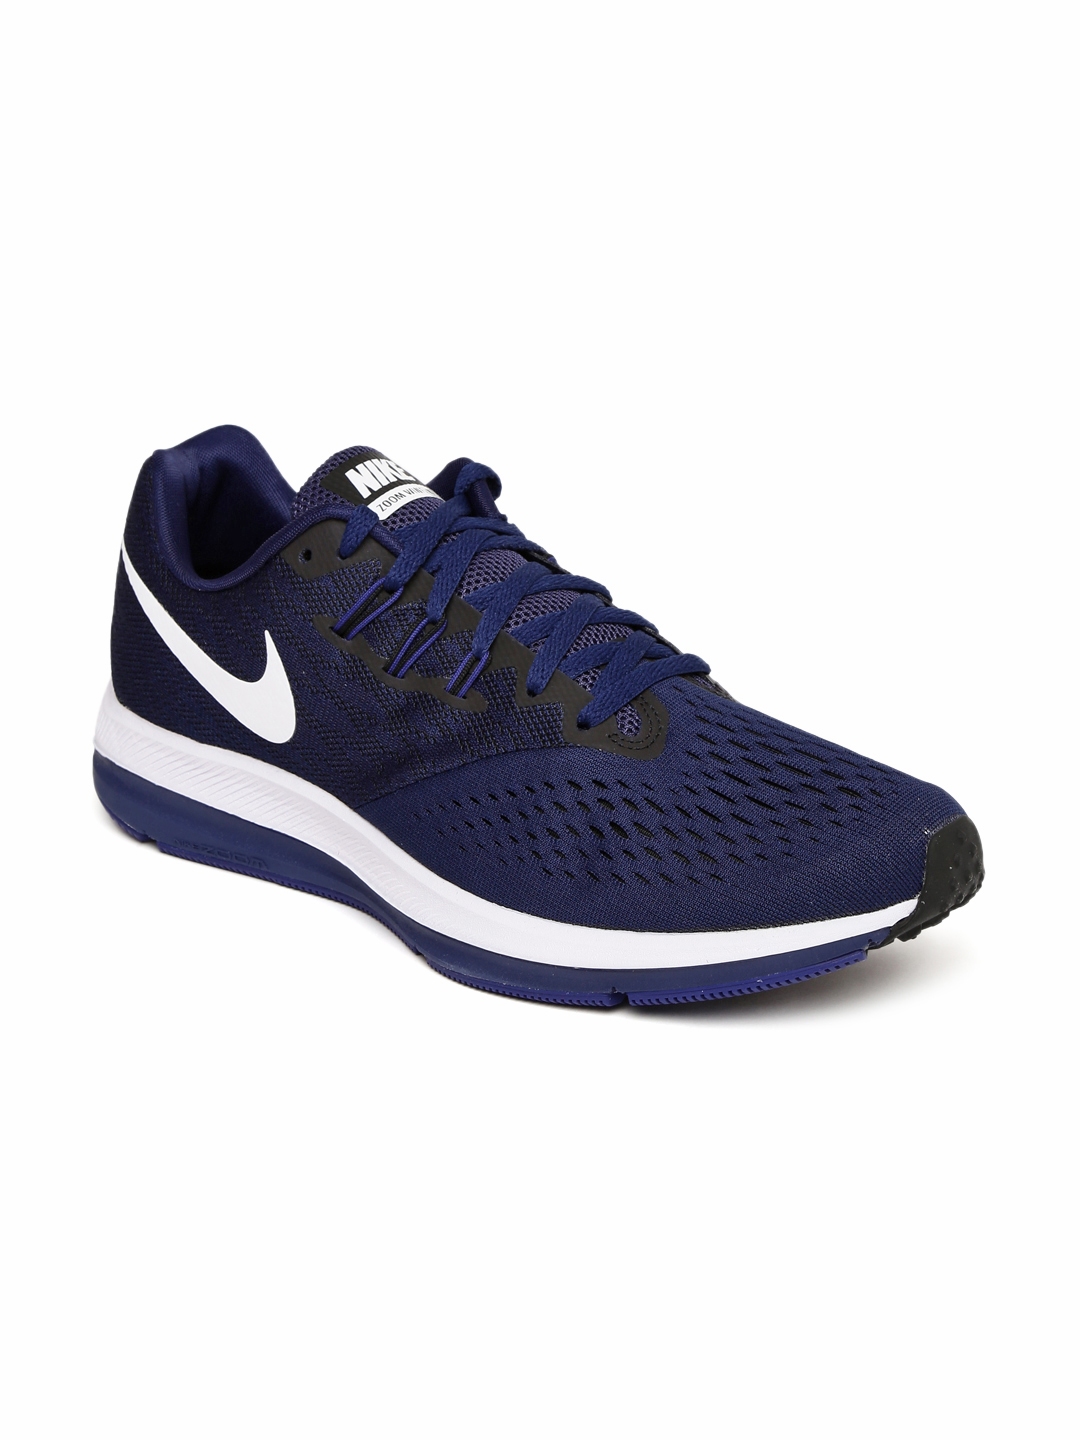 Buy Nike Men Navy Blue ZOOM WINFLO 4 Running Shoes - Sports Shoes for ...